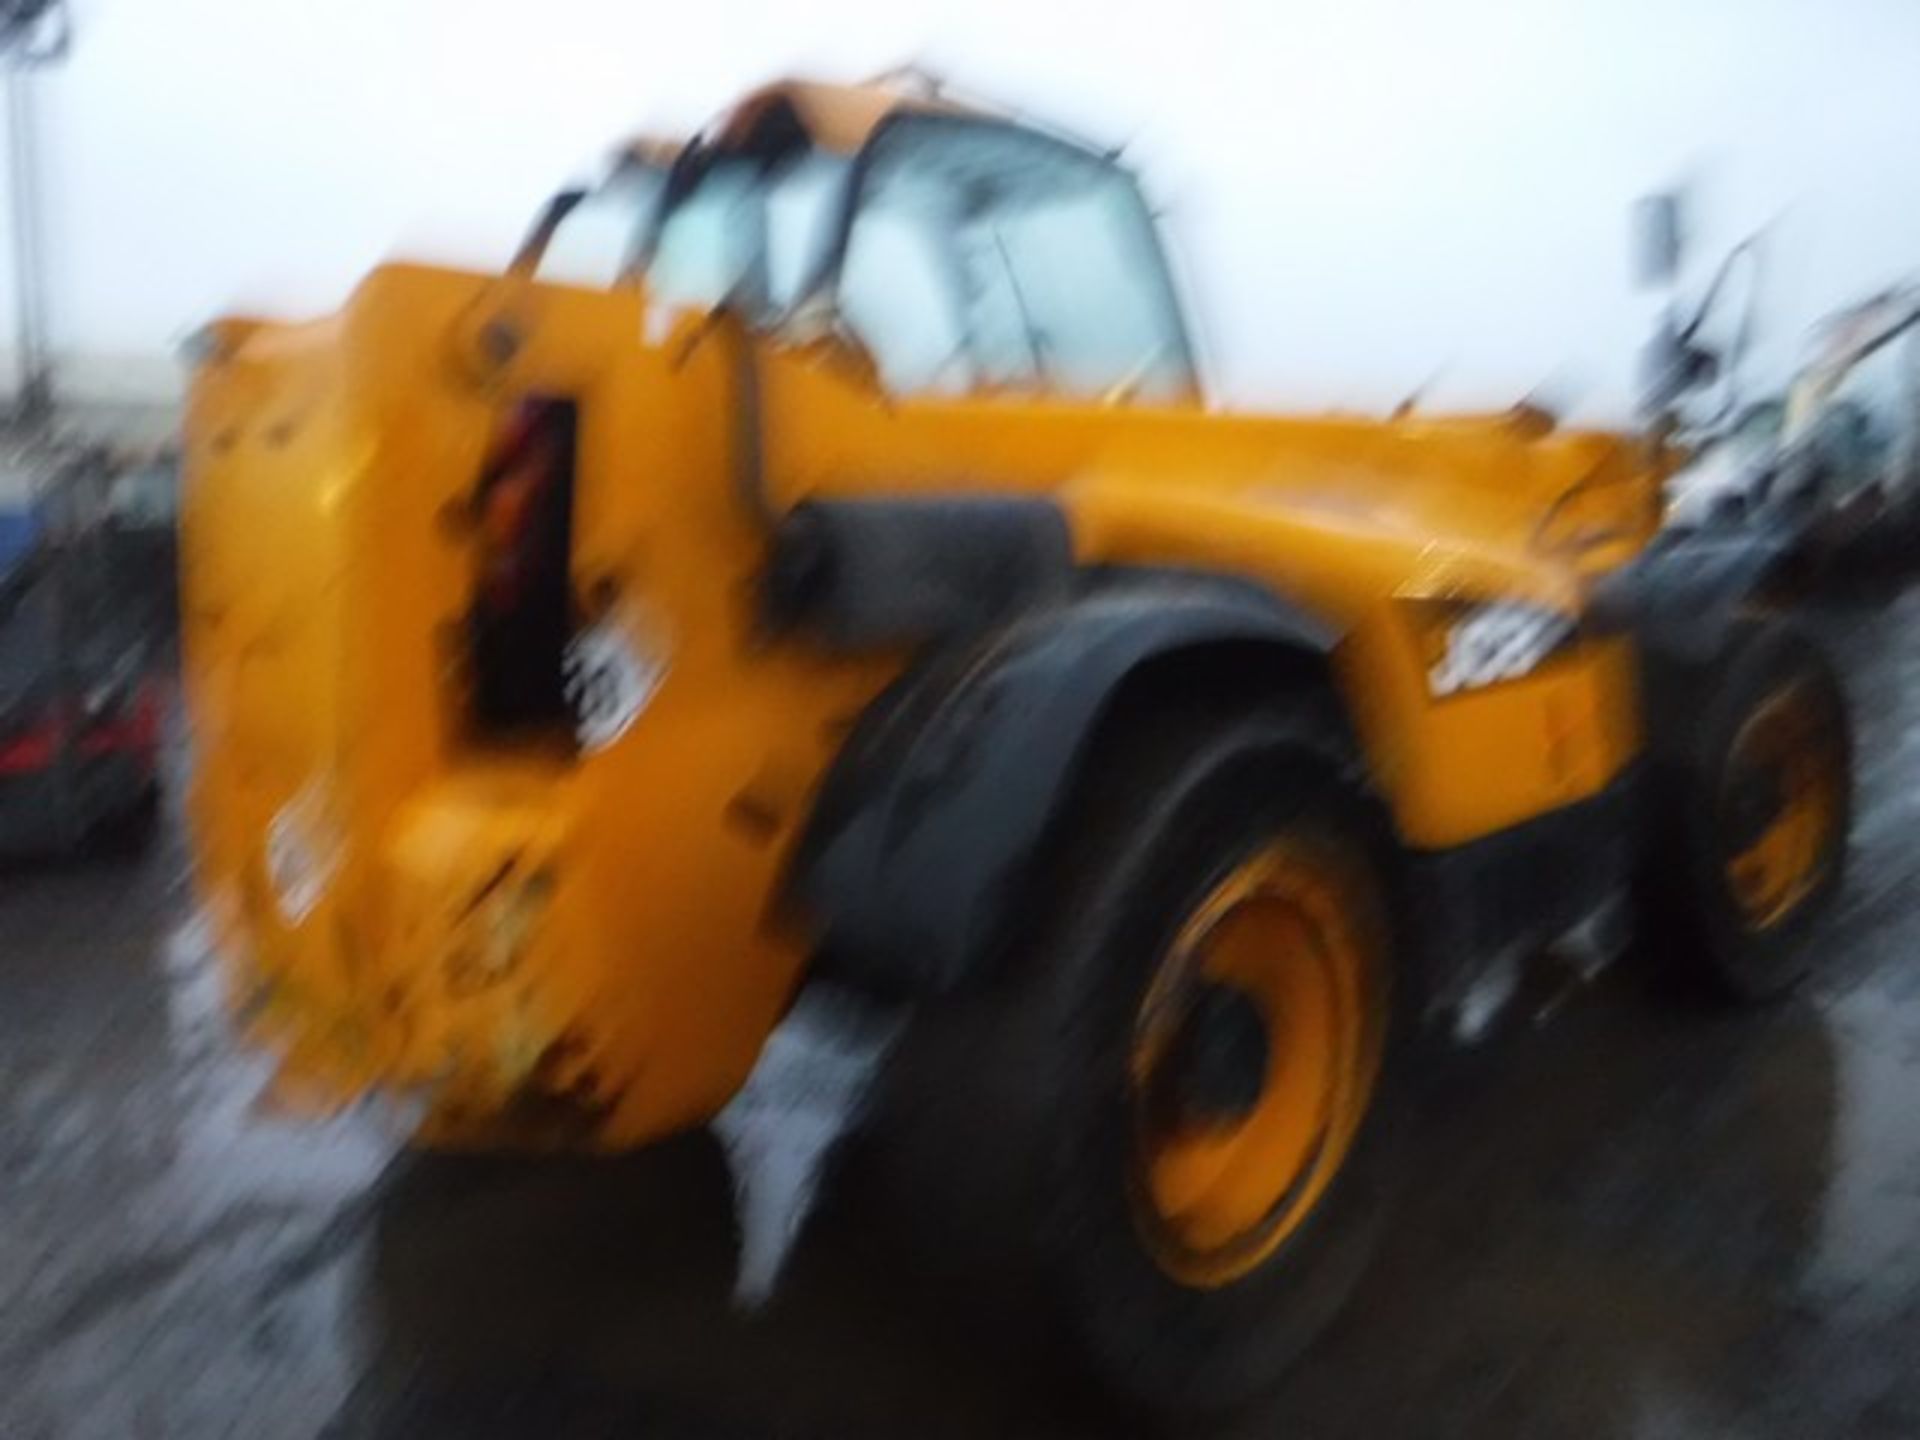 2012 JCB 550 - 80 WASTE SPECIAL TELESCOPIC HANDLER, 8870hrs (NOT VERIFIED) ON SOLID TYRES - Image 6 of 13